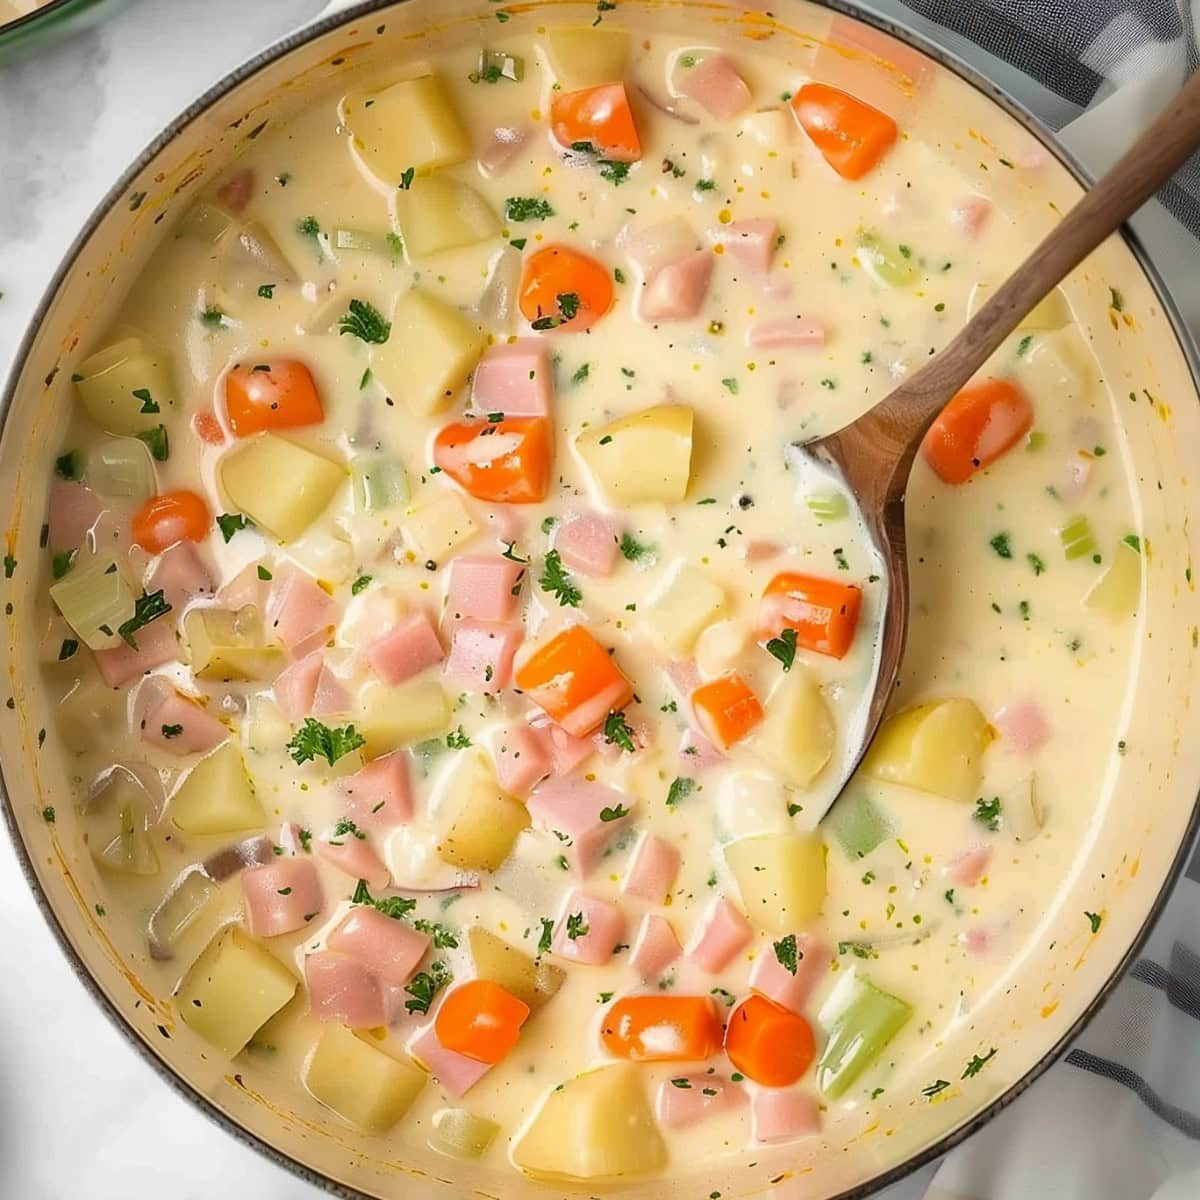 Top View of Ham and Bean Soup with Chunks of Ham, Potatoes, Carrots, Celery, Onions, and Seasonings in a Dutch Oven with a Wooden Spoon